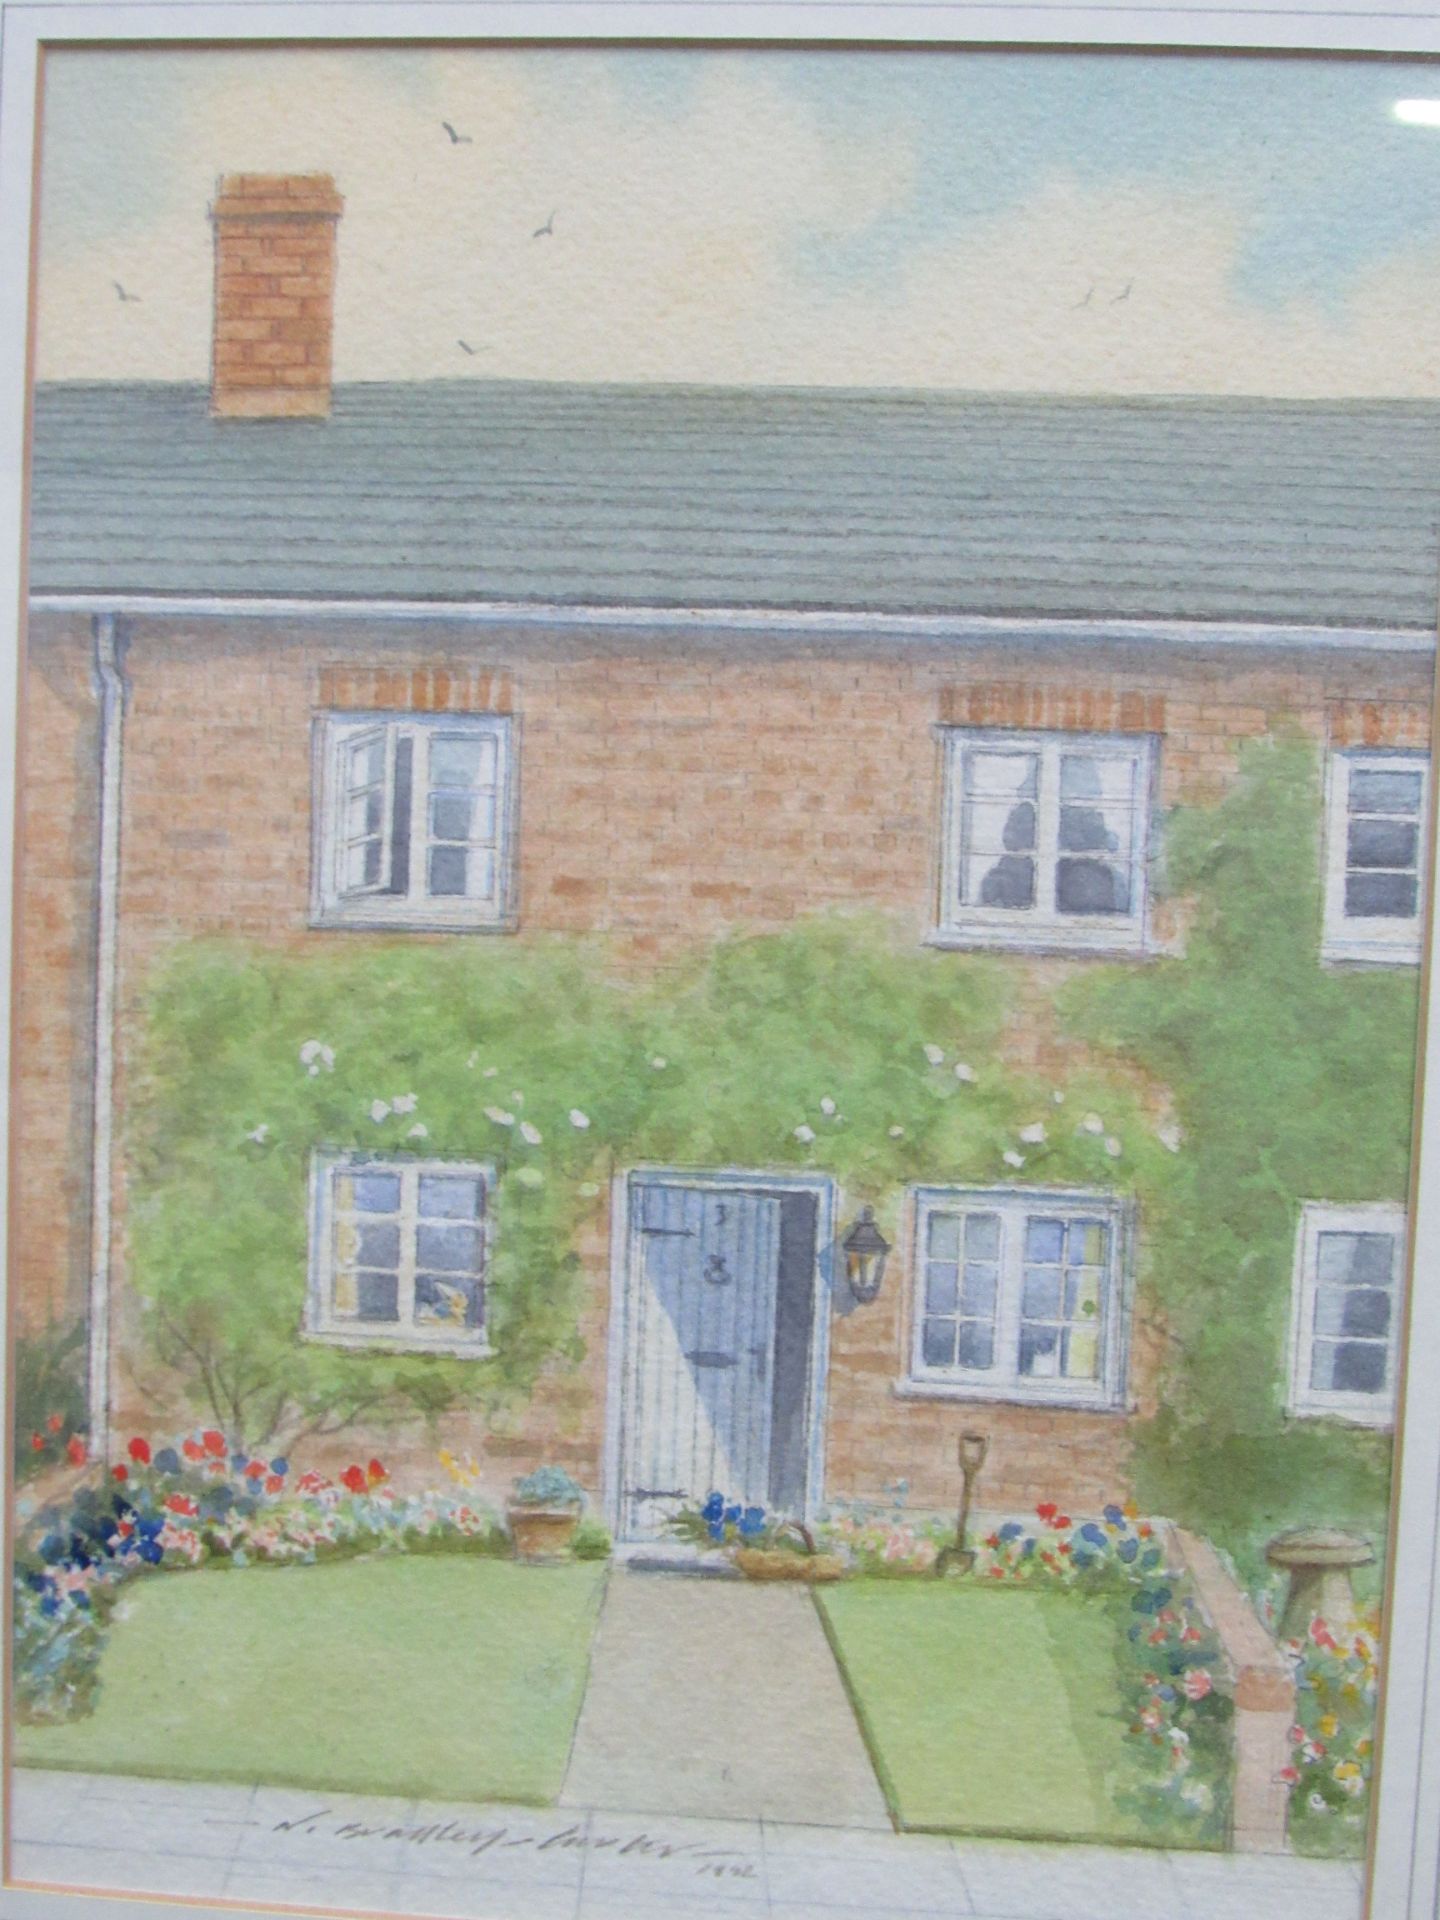 Pencil sketch by B.N Bradley Carter of a house and garden; and a watercolour of the same house by - Image 2 of 2